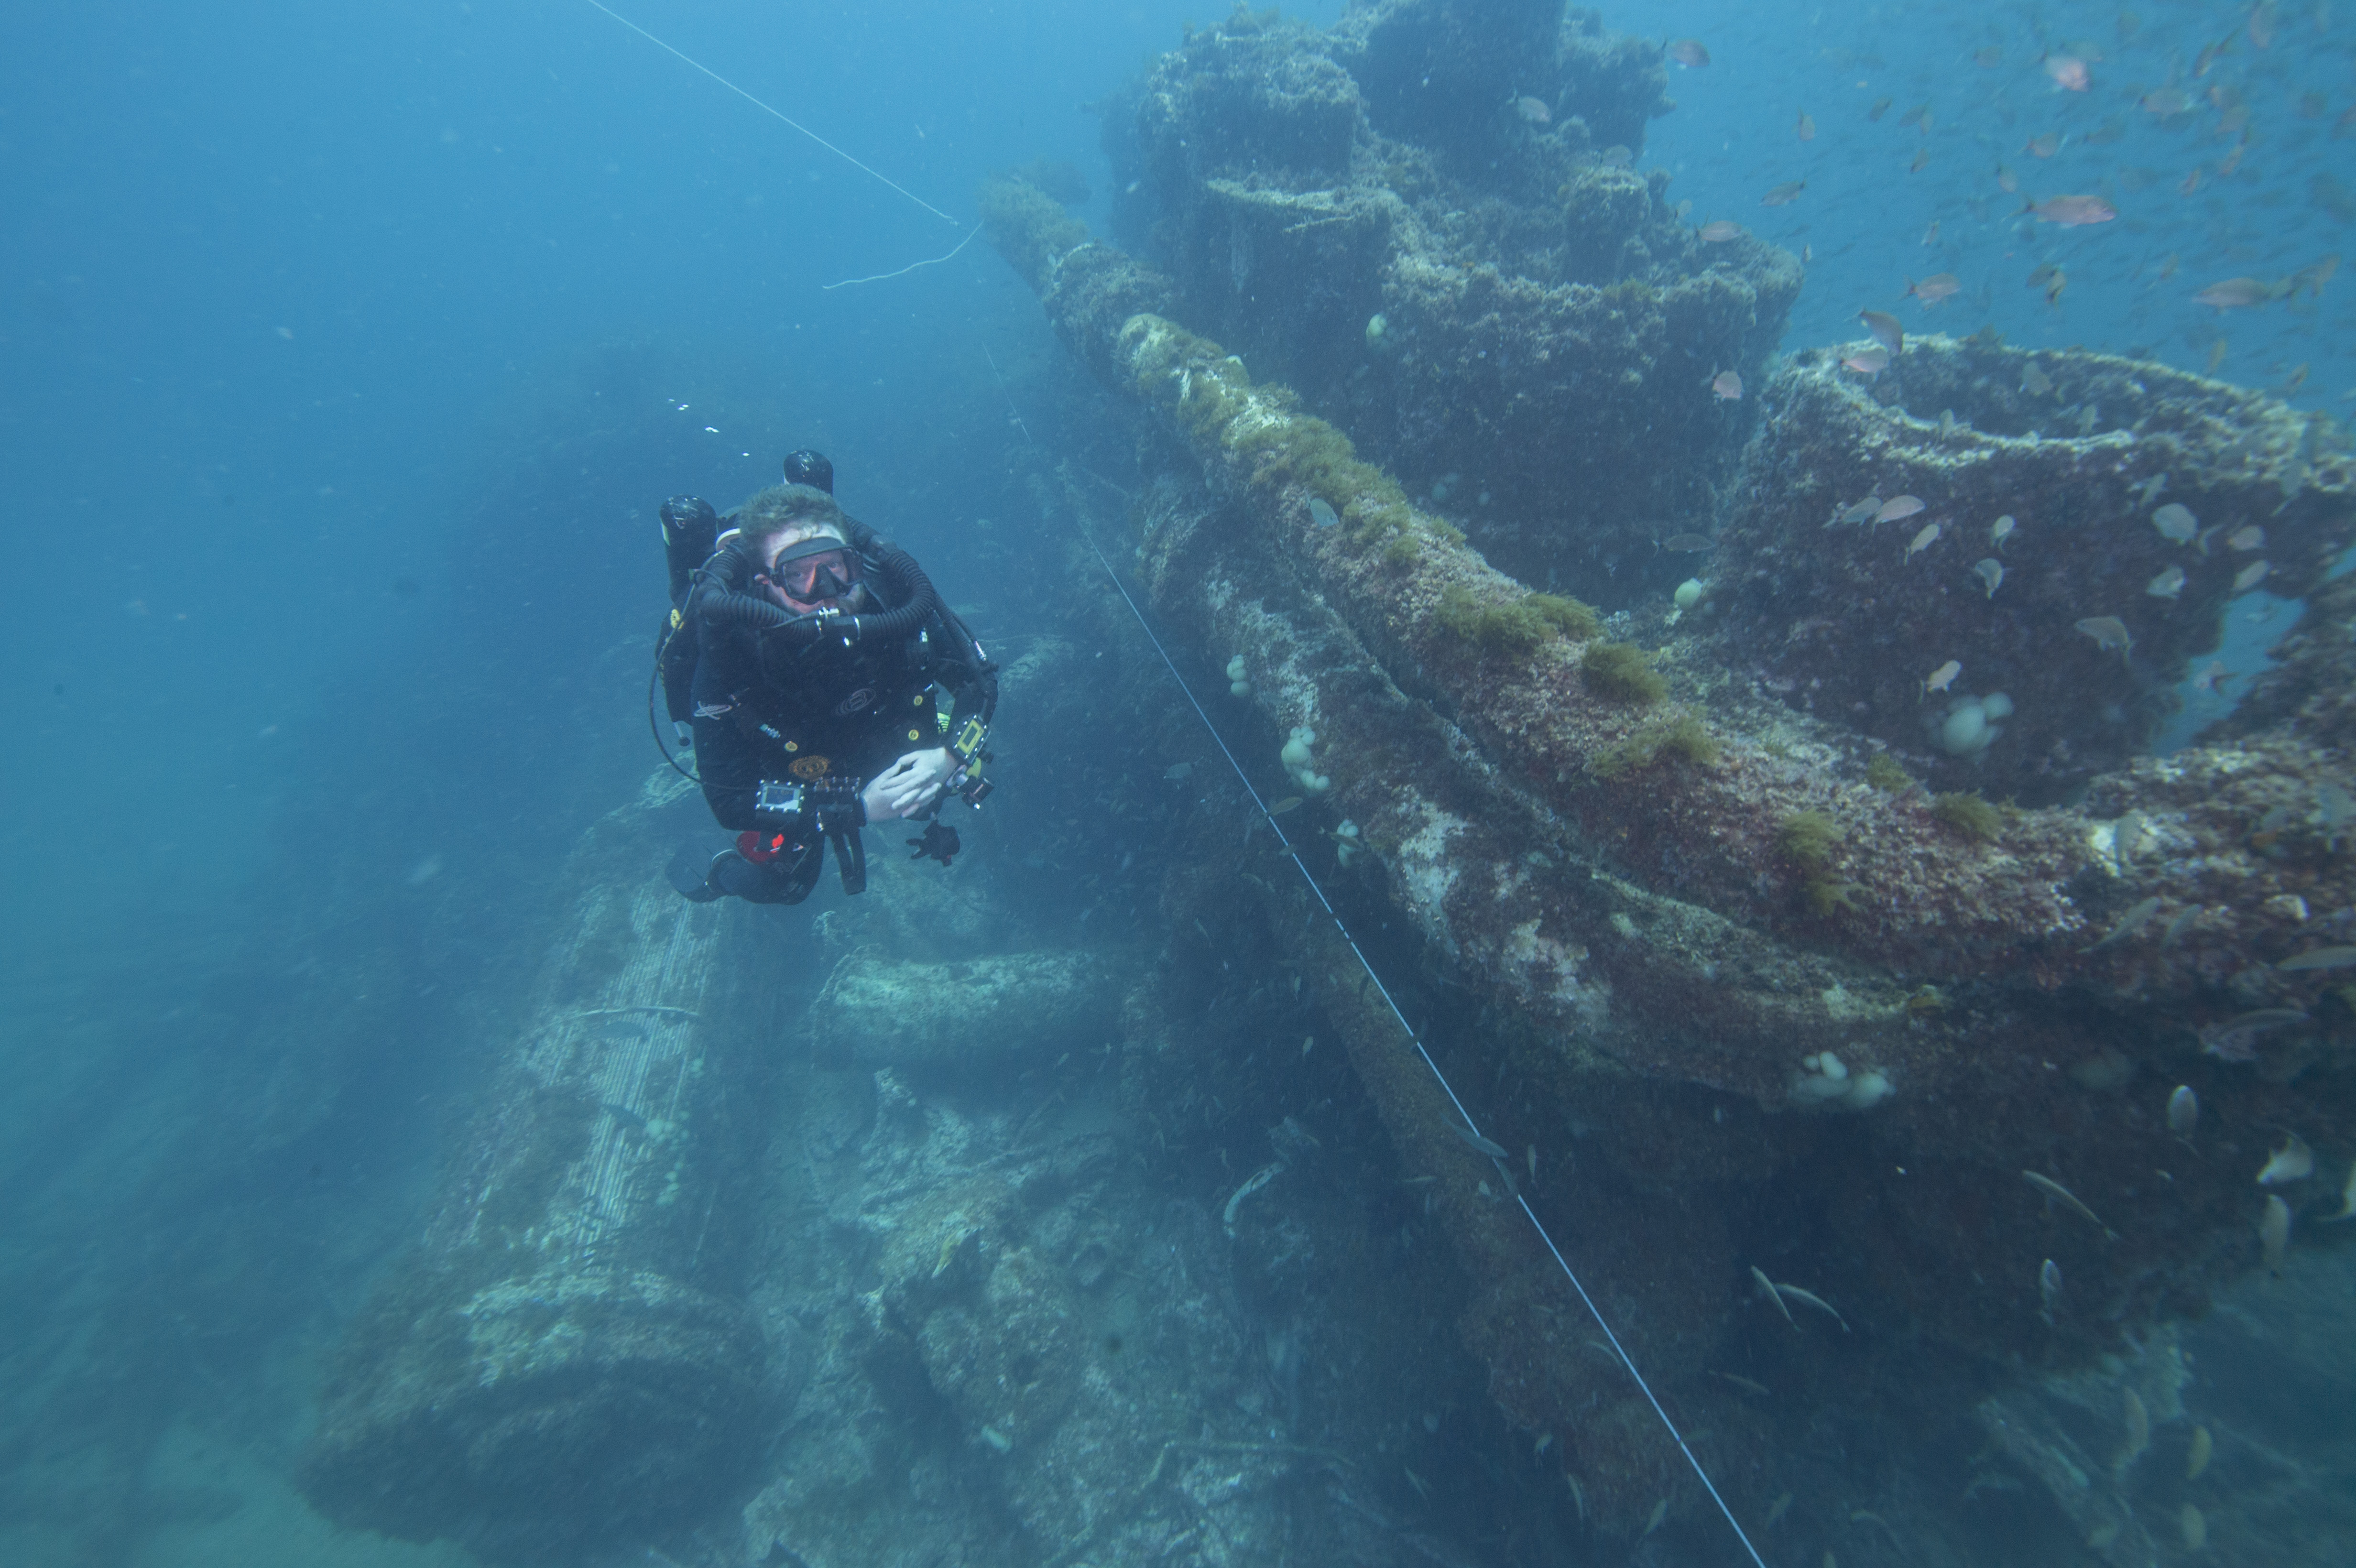 Diving the wreck